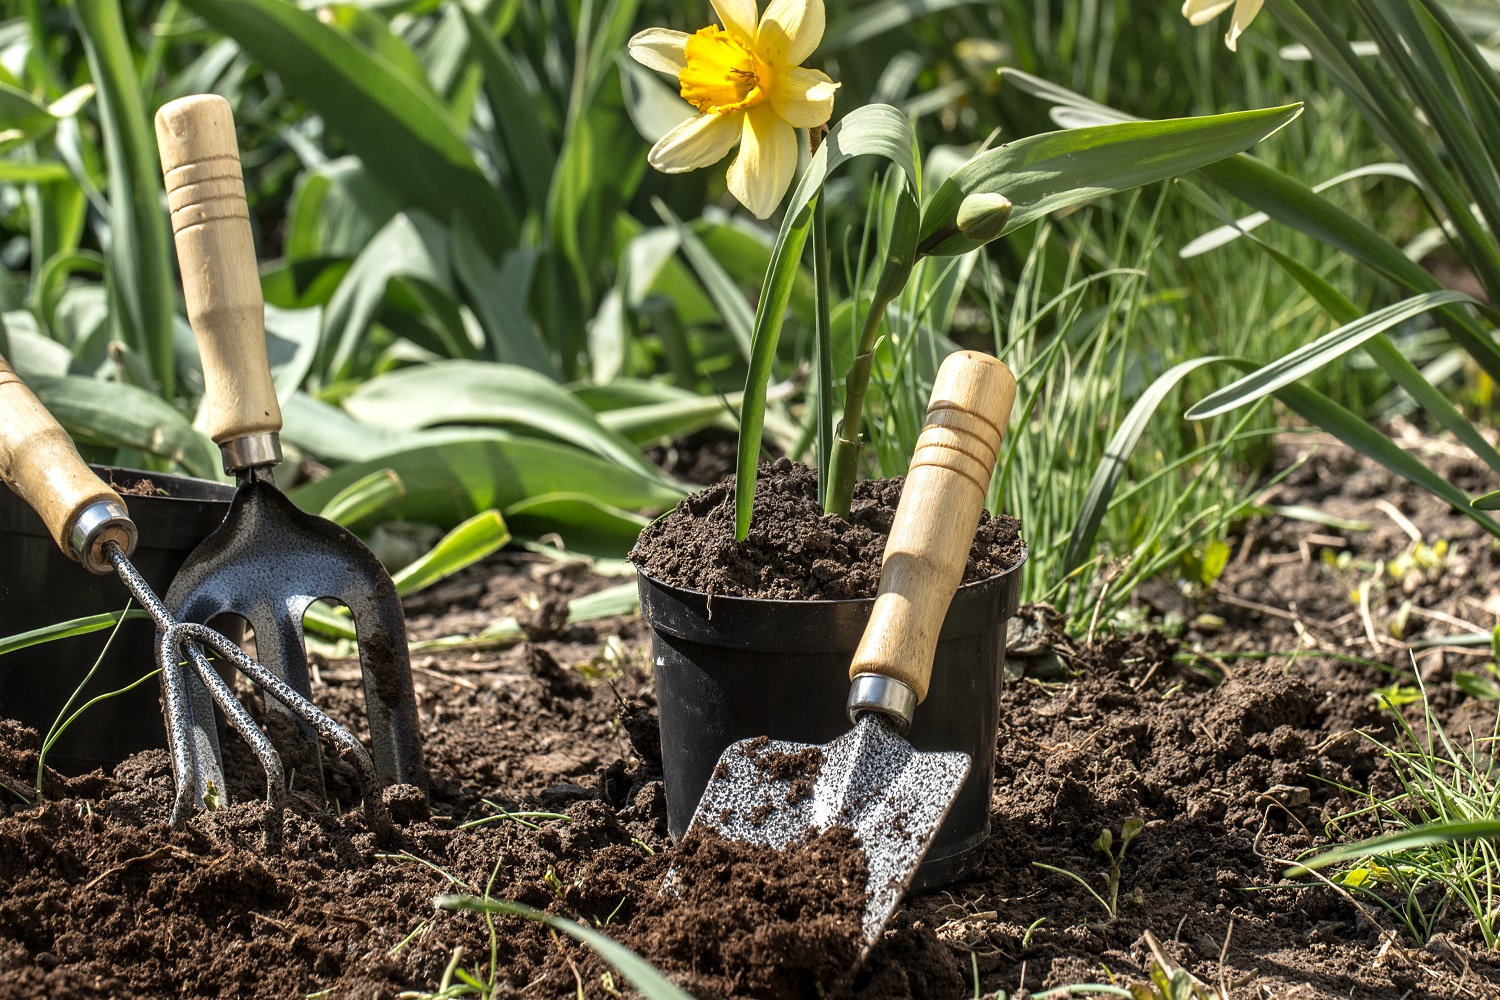 Gardening kits are one of the best gifts for gardeners